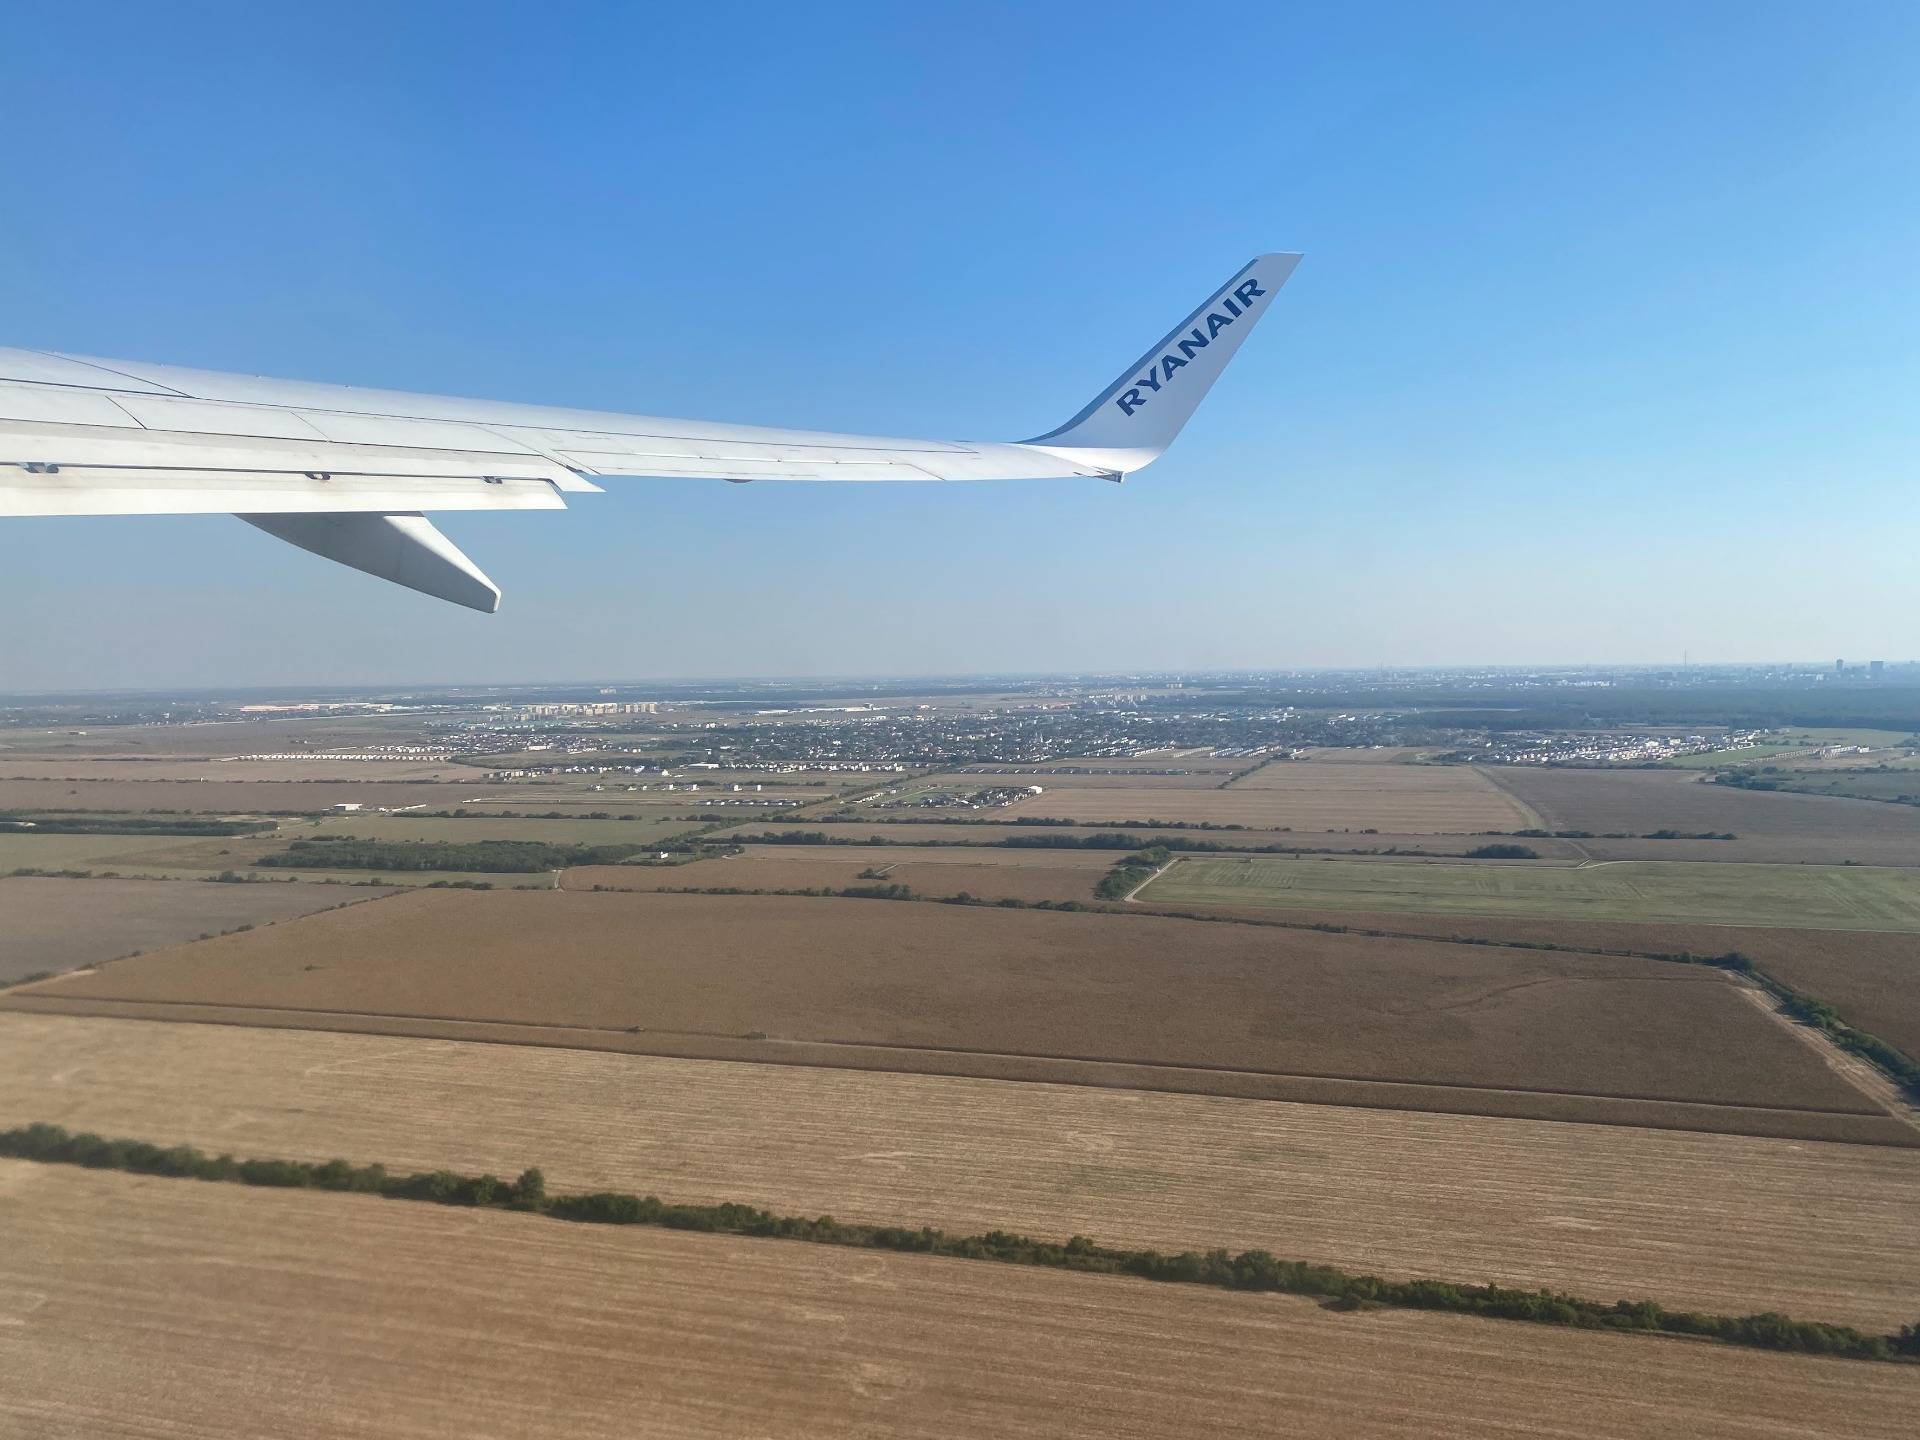 Taking off from Otopeni airport in Bucharest, Romania